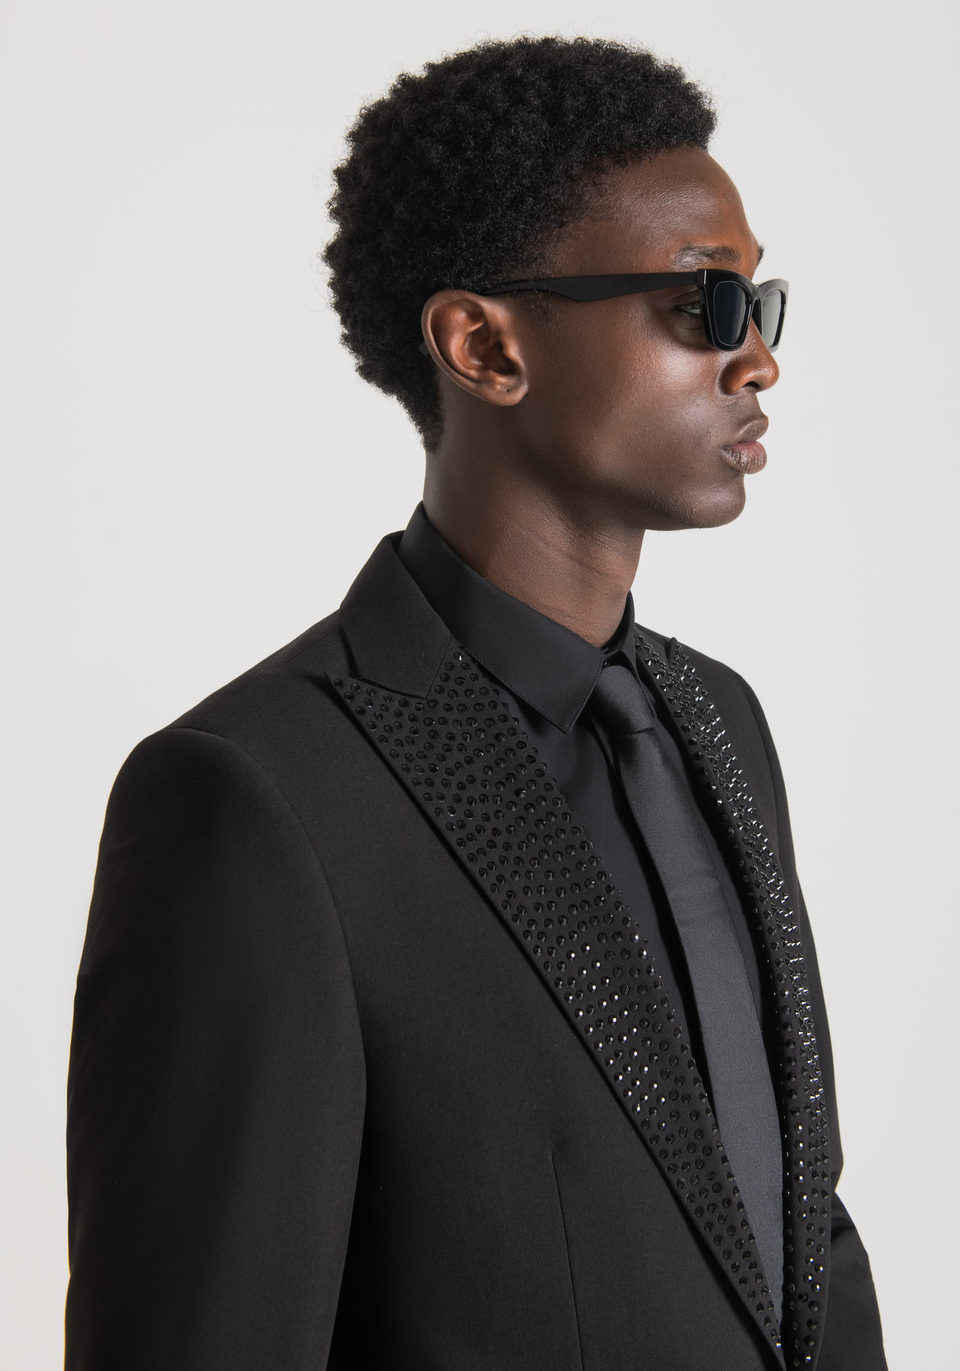 "VIVIENNE" SLIM FIT JACKET IN STRETCH VISCOSE BLEND FABRIC WITH MICRO APPLICATIONS ON THE LAPELS - Antony Morato Online Shop